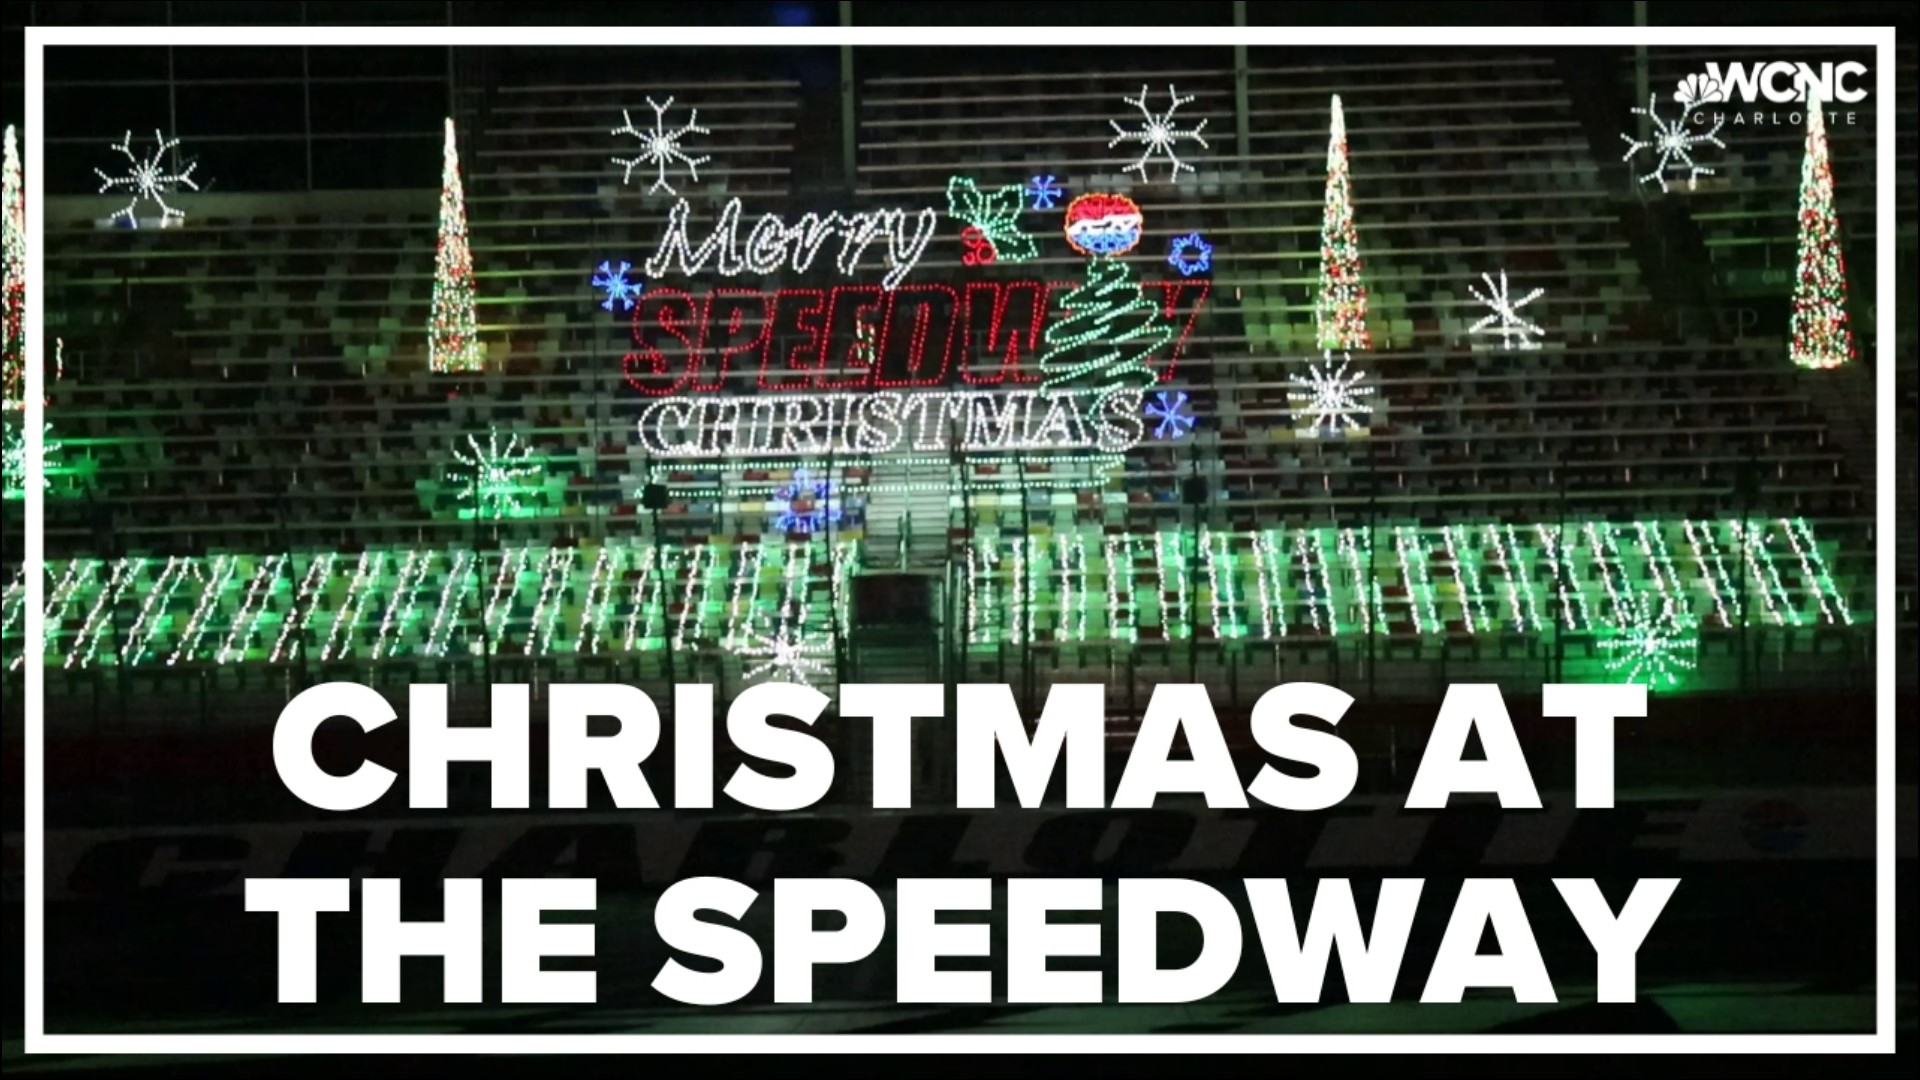 The holiday tradition has once again taken over the track in Concord